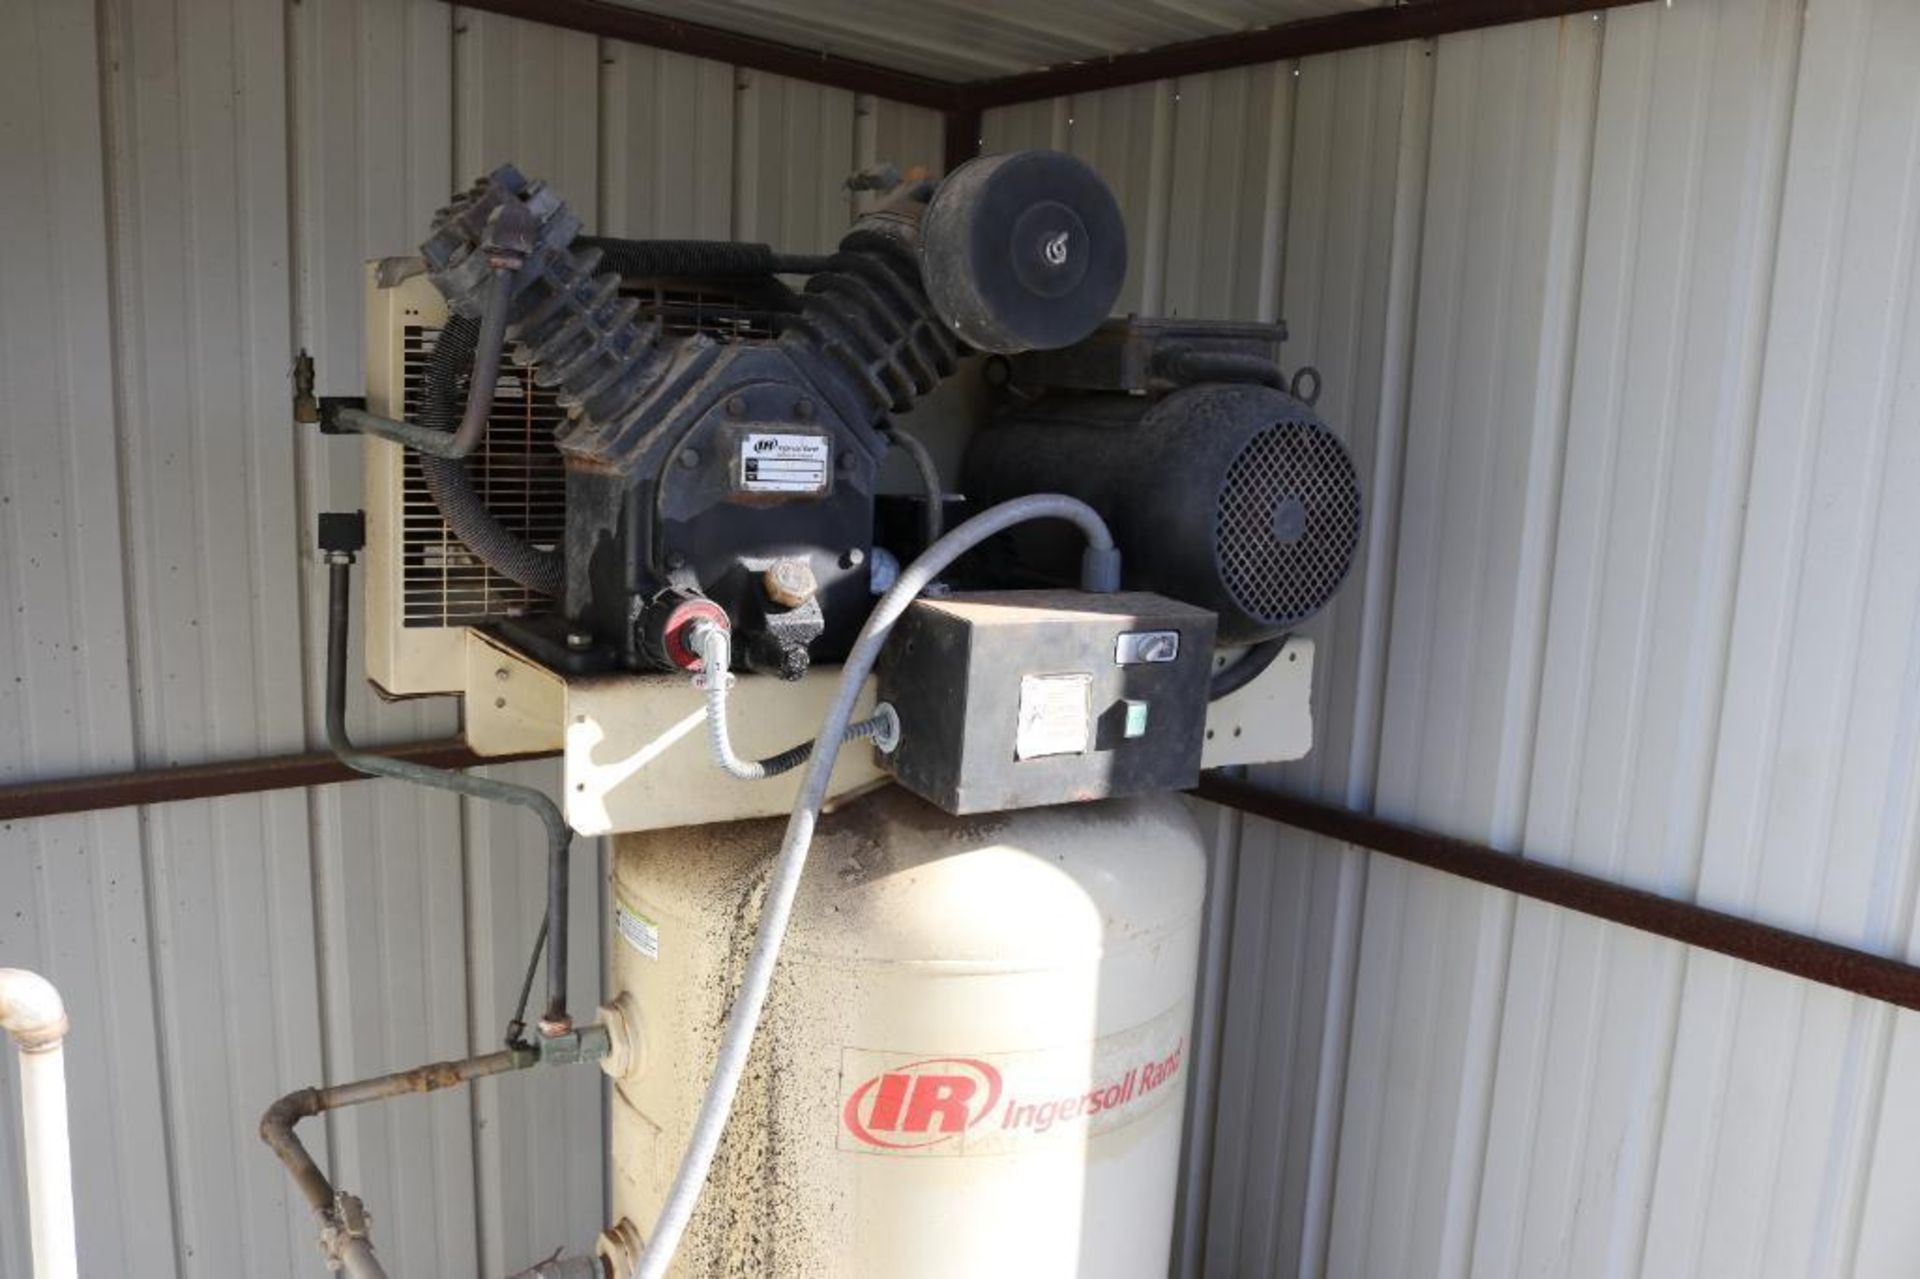 Ingersoll Rand Model 2475.5-P Two Stage Cast Iron Air Compressor Serial Number: CBV554476 230V 60Hz - Image 5 of 9